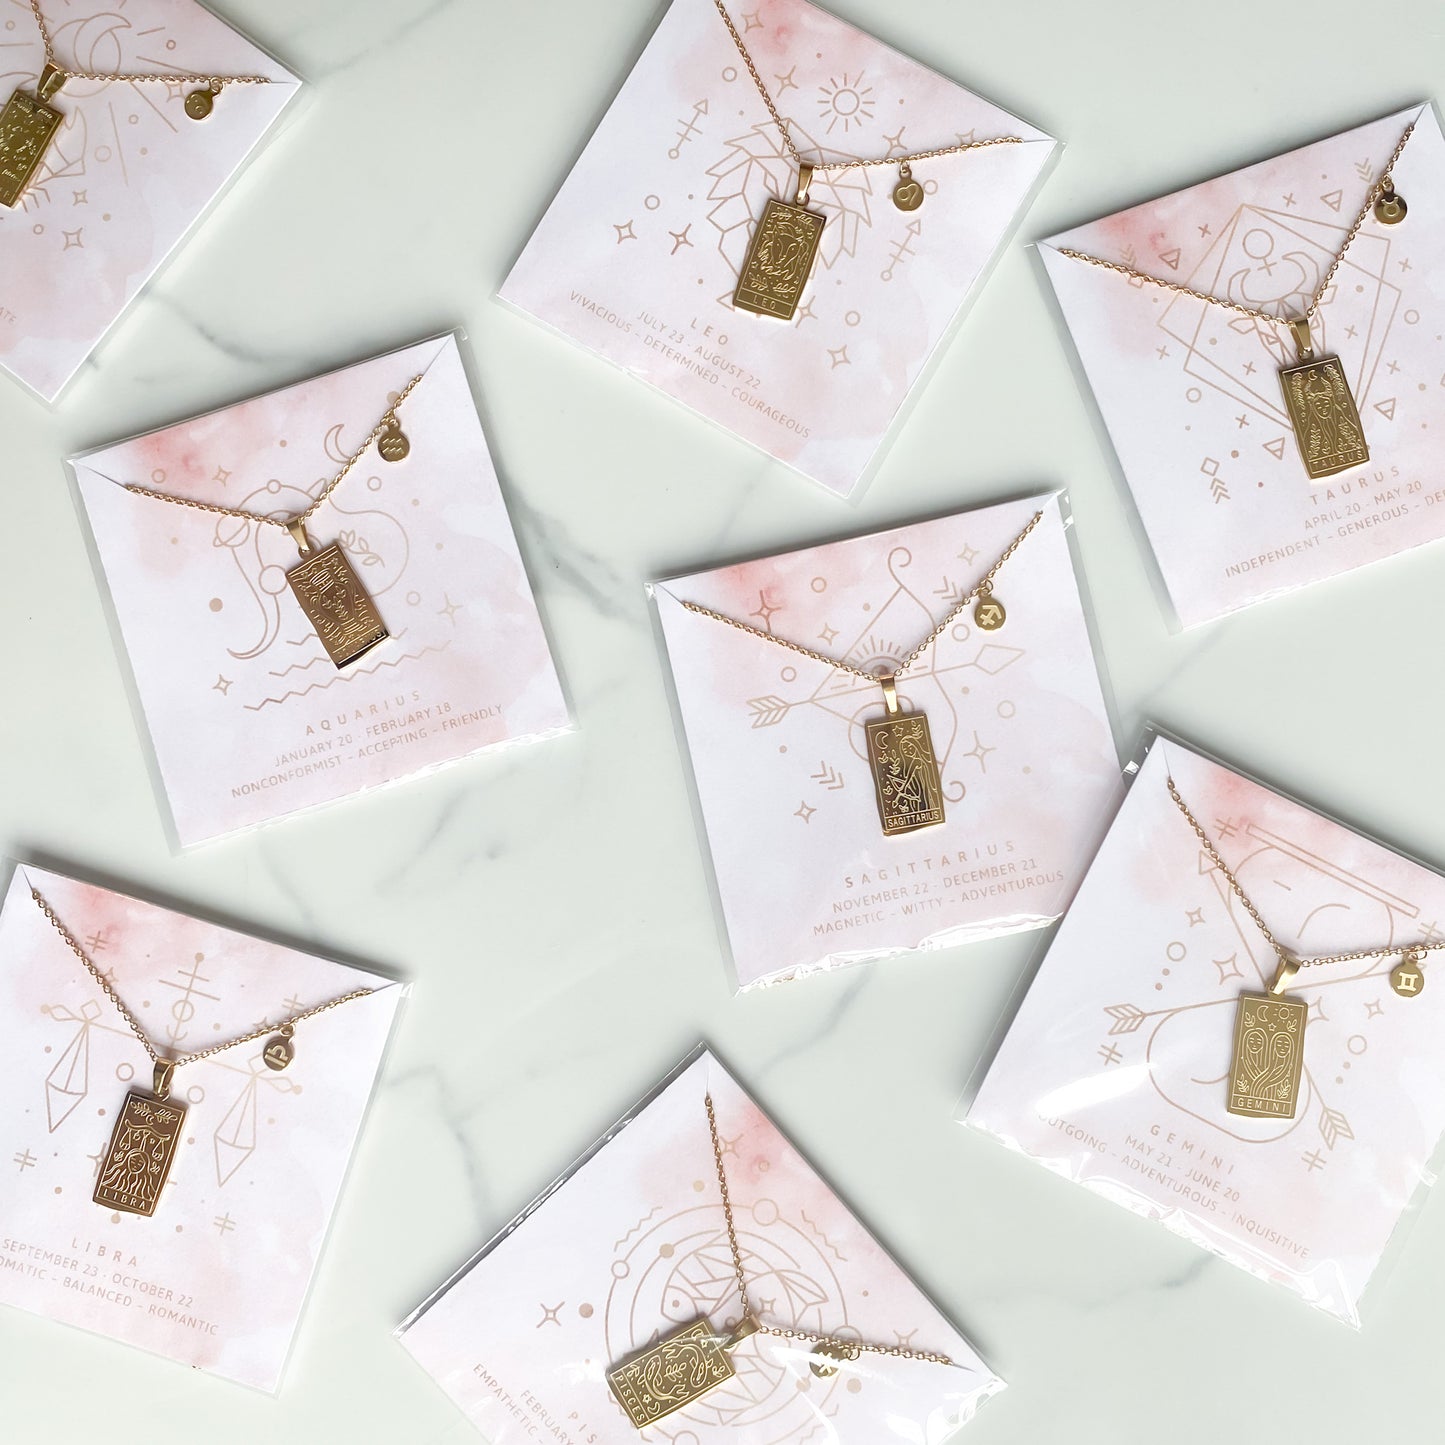 Zodiac Constellation 18K gold plated pendant necklaces packaged with custom card backers